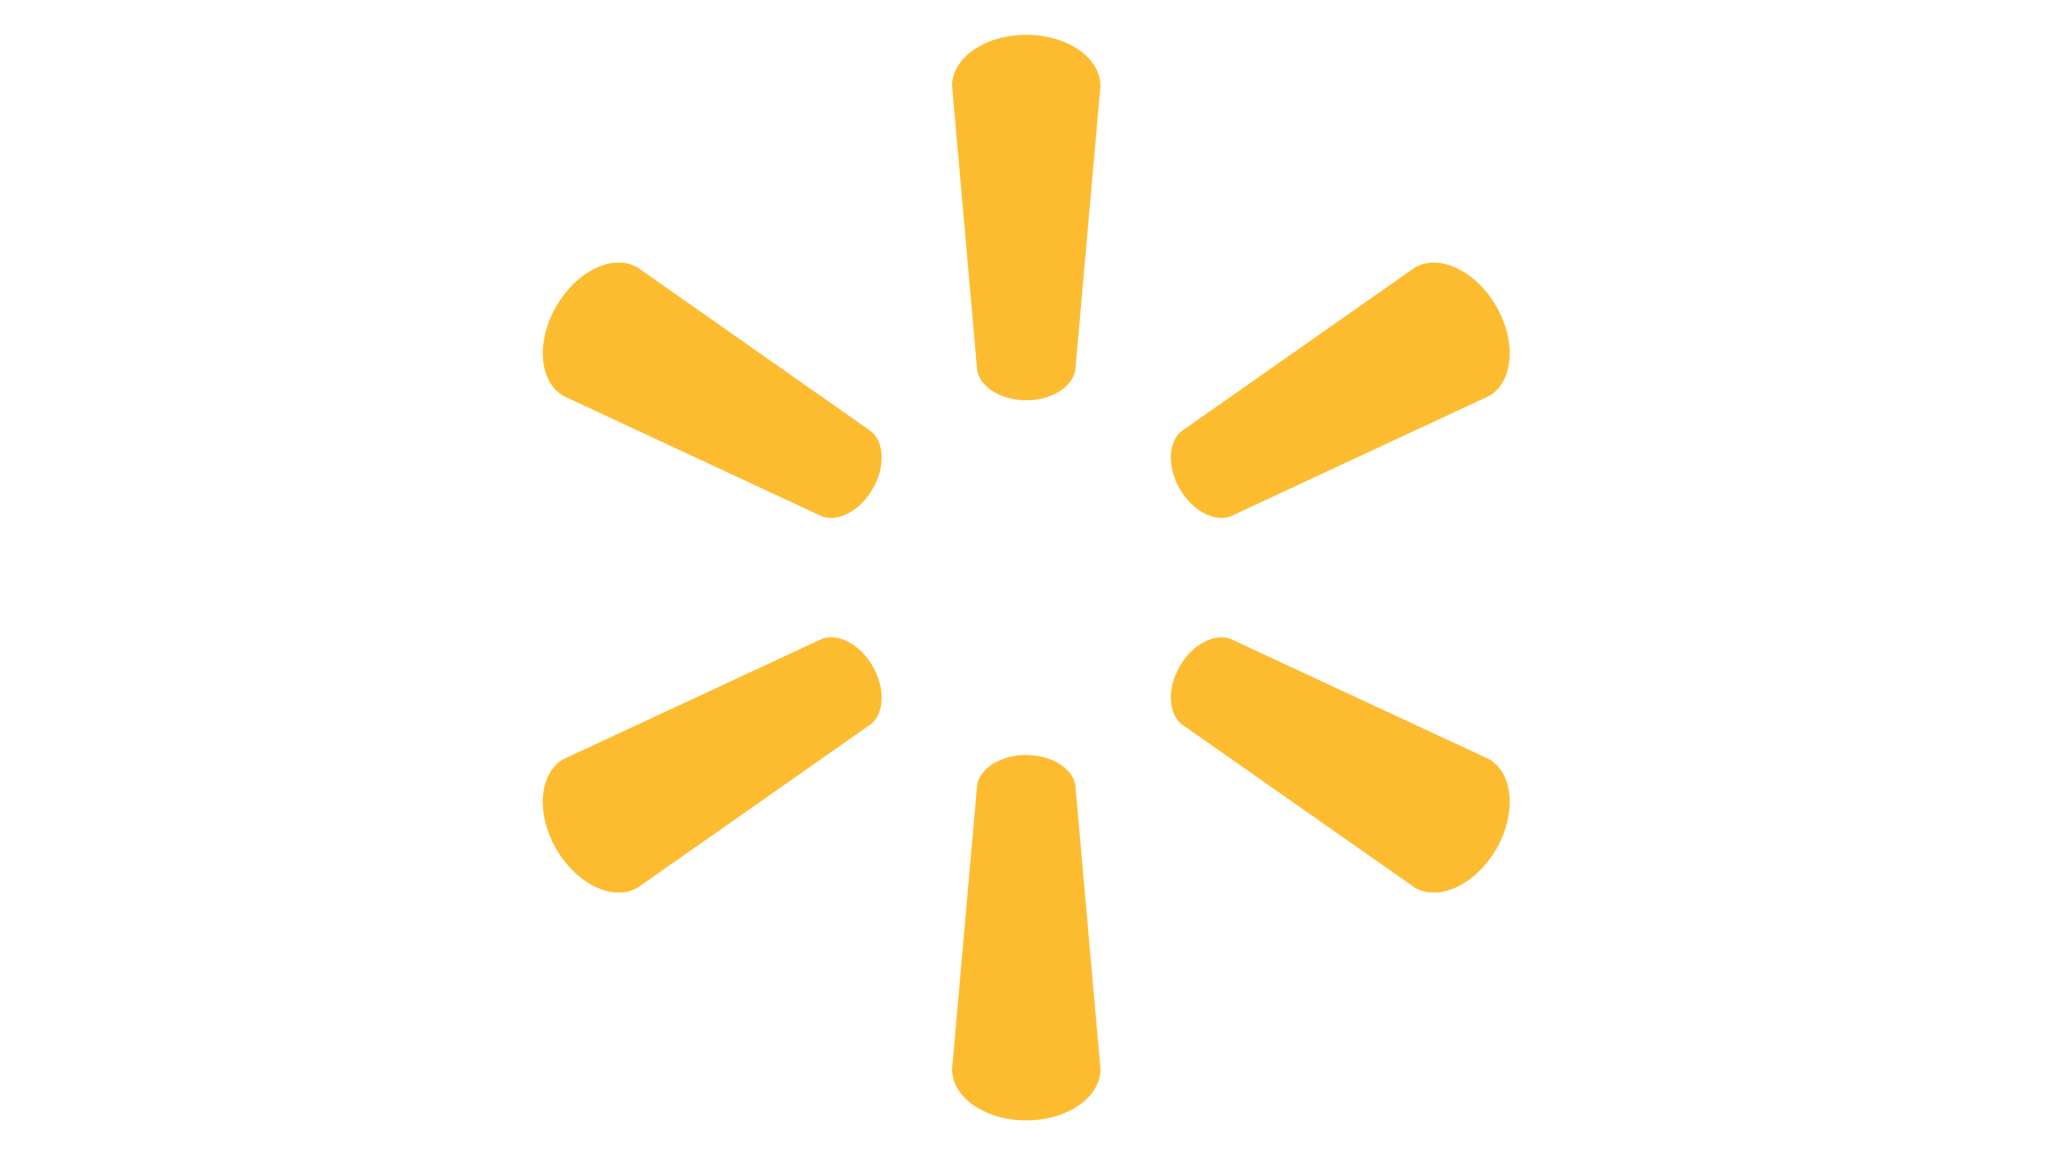 walmart-logo-and-symbol-meaning-history-sign